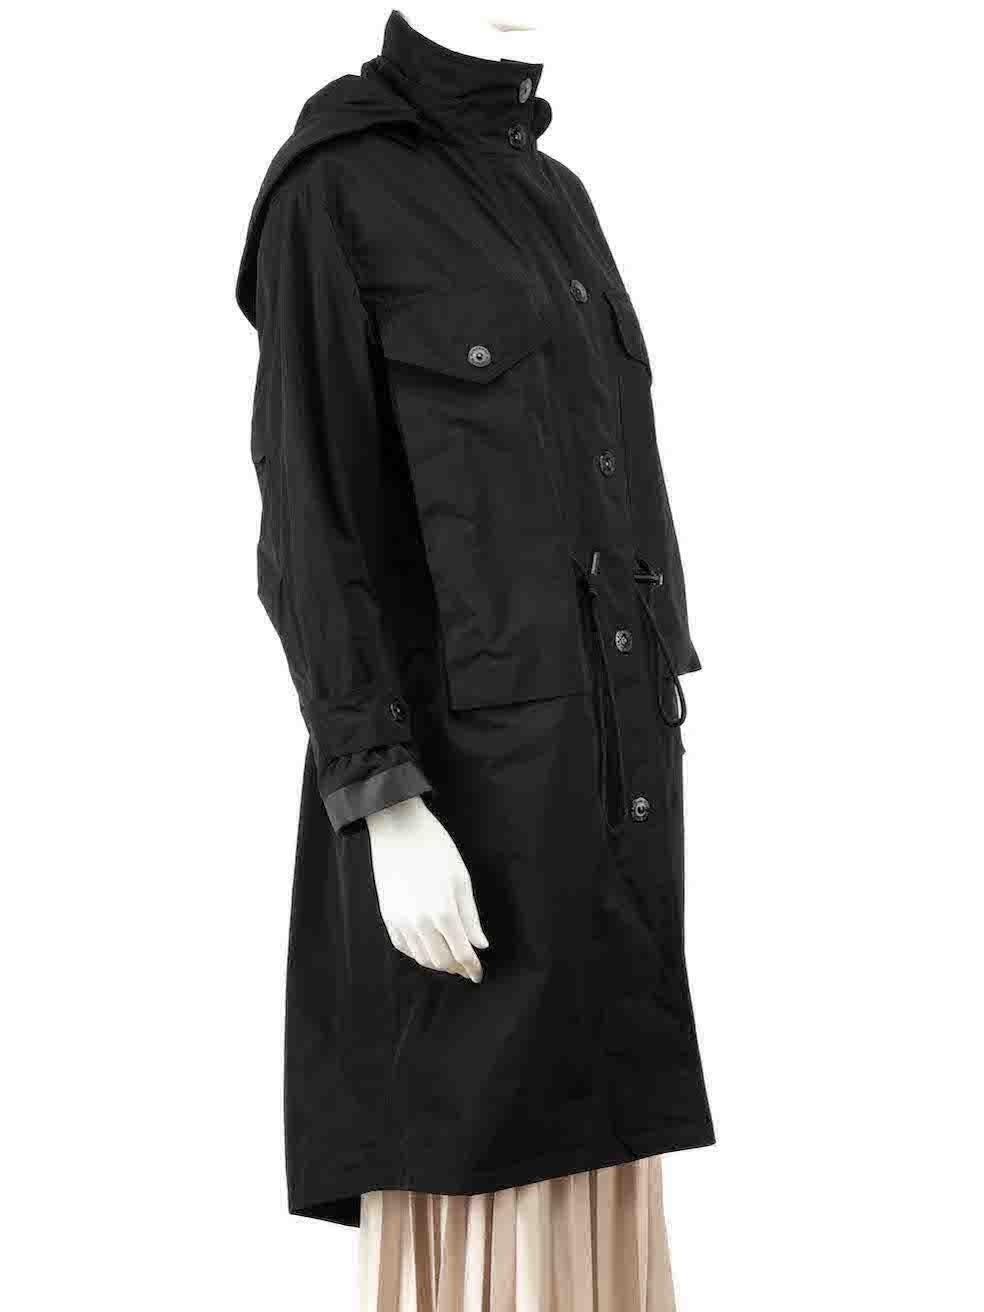 CONDITION is Very good. Minimal wear to coat is evident. Minimal wear to the front and the right sleeve with light marks on this used Burberry designer resale item.
 
 Details
 Black
 Polyester
 Parka coat
 Detachable hood
 Zip and snap button